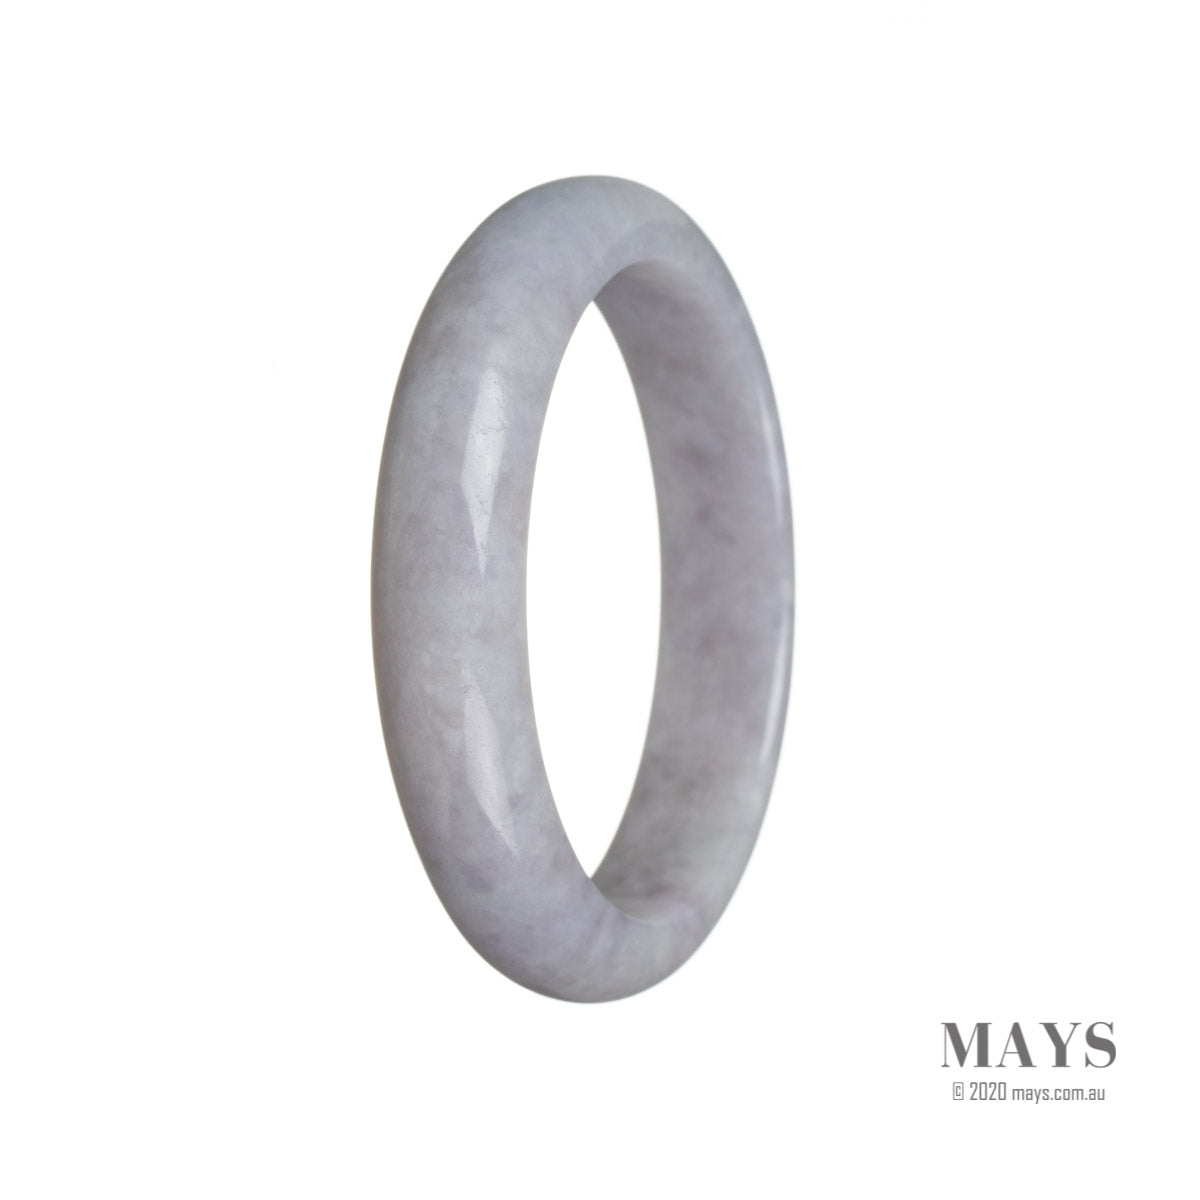 An exquisite lavender jade bangle with a half-moon shape, crafted from Grade A jadeite. A truly authentic and stunning piece from MAYS GEMS.